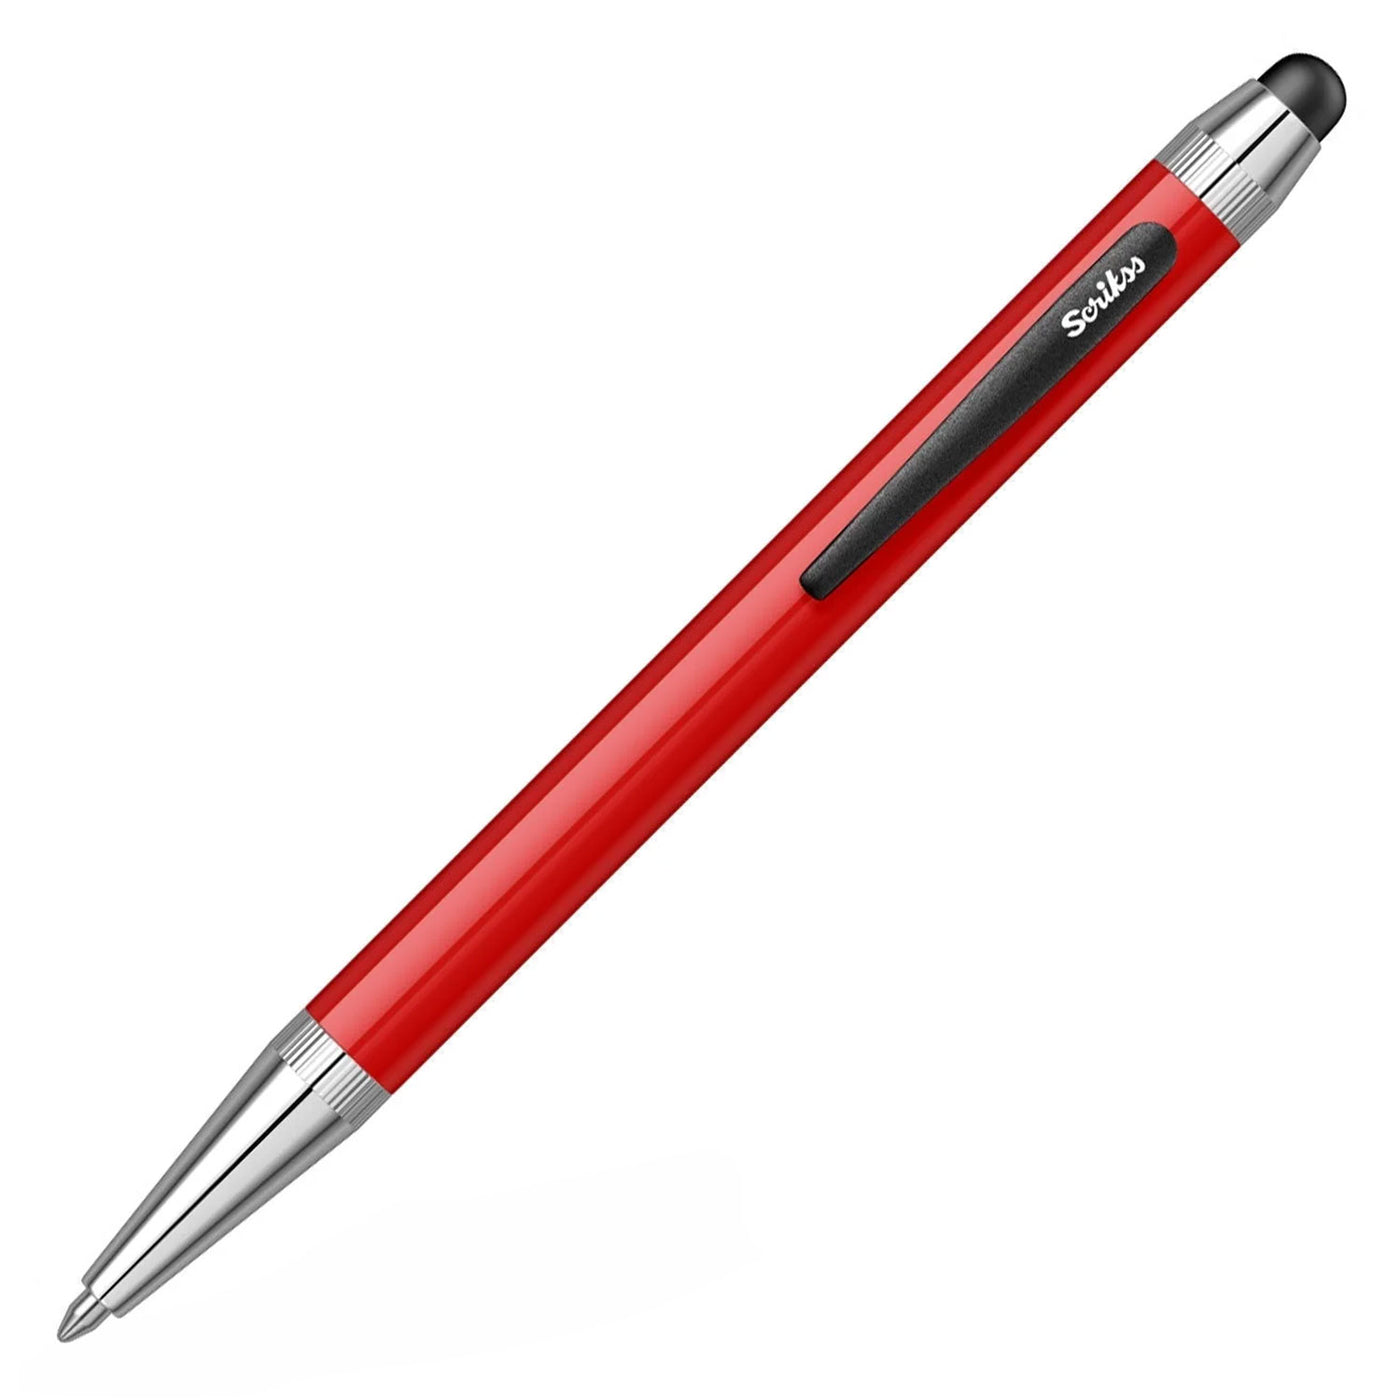 Scrikss Smart 699 Multifunction Ball Pen with Stylus - Red CT 1